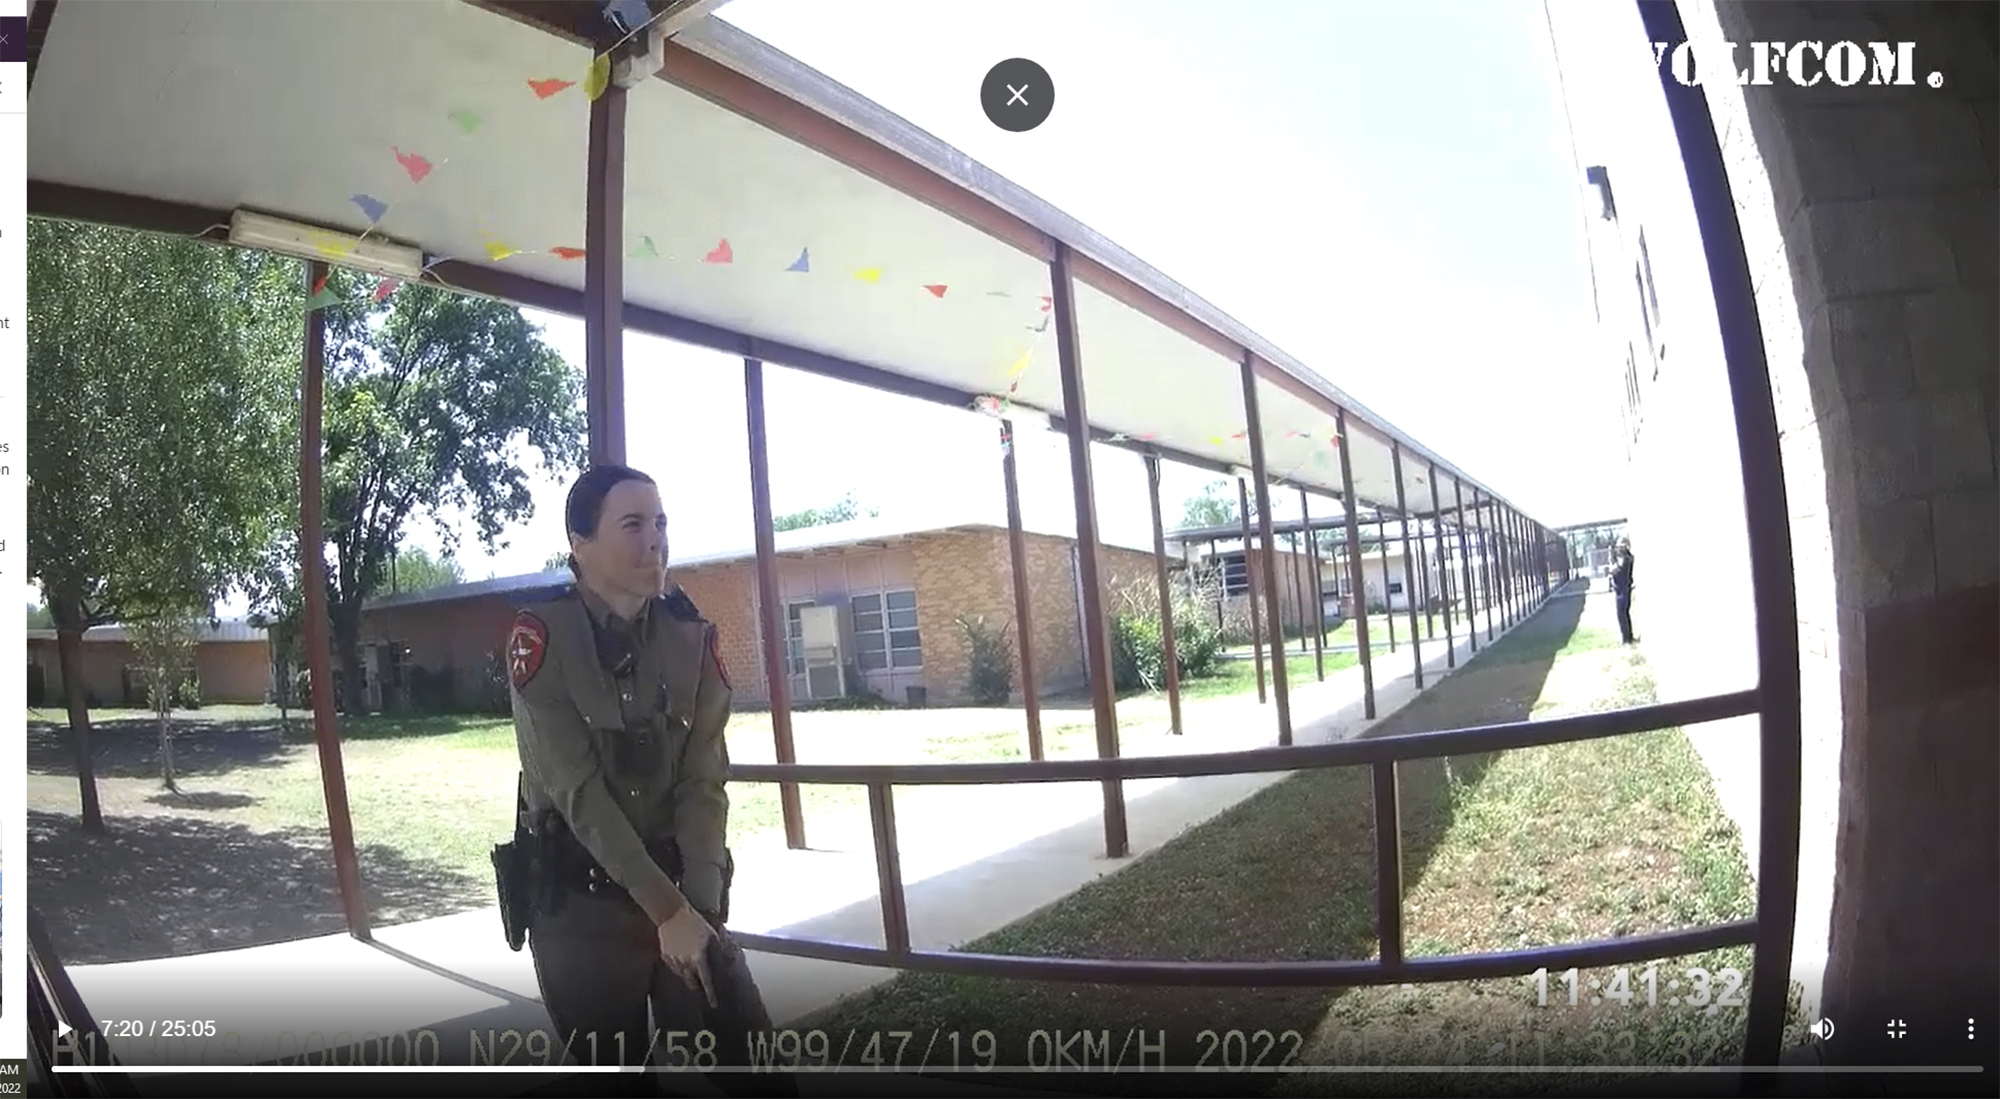 Former Texas Department of Public Safety trooper Crimson Elizondo responds to the shooting at Robb Elementary School in Uvalde, Texas, on May 24.